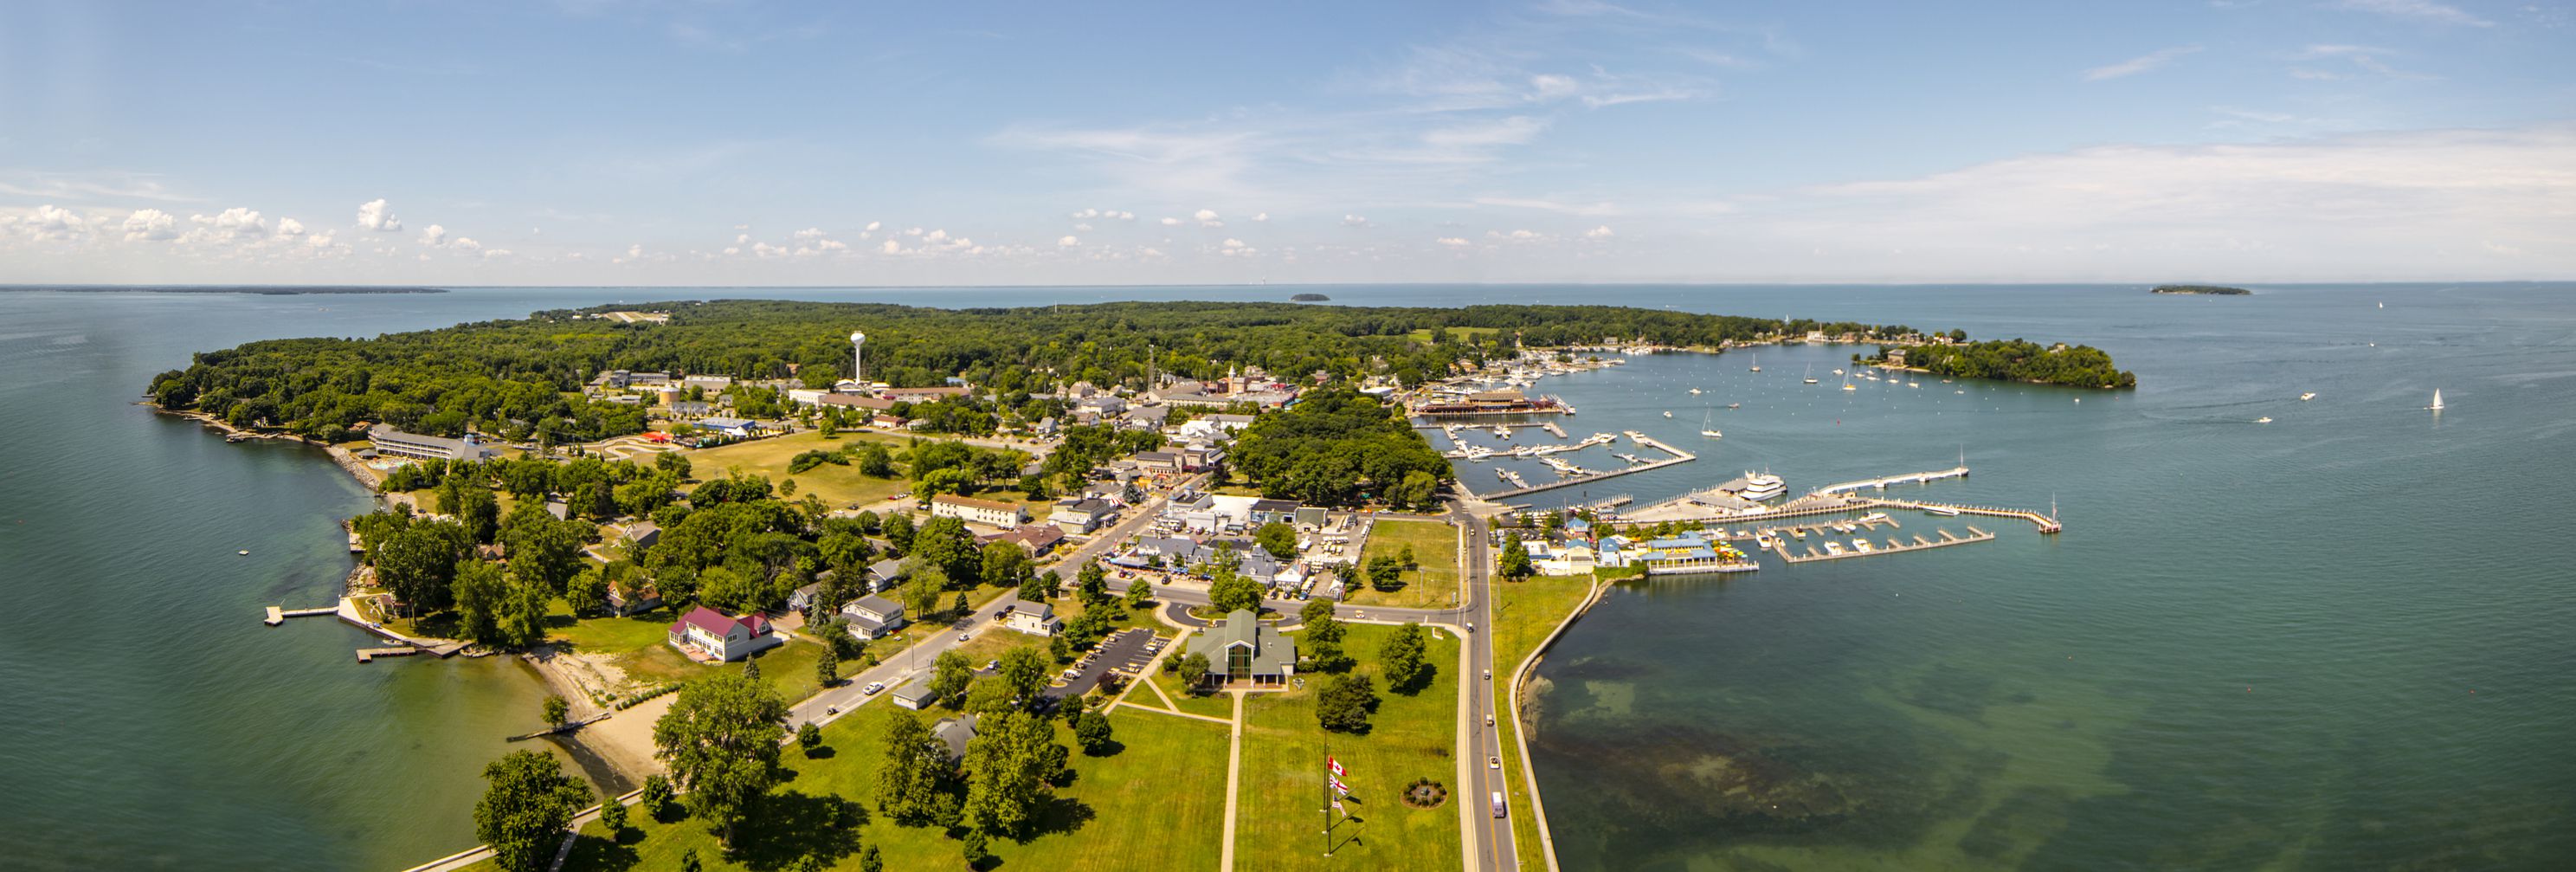 What to See and Do in Put-in-Bay,Ohio on South Bass Island